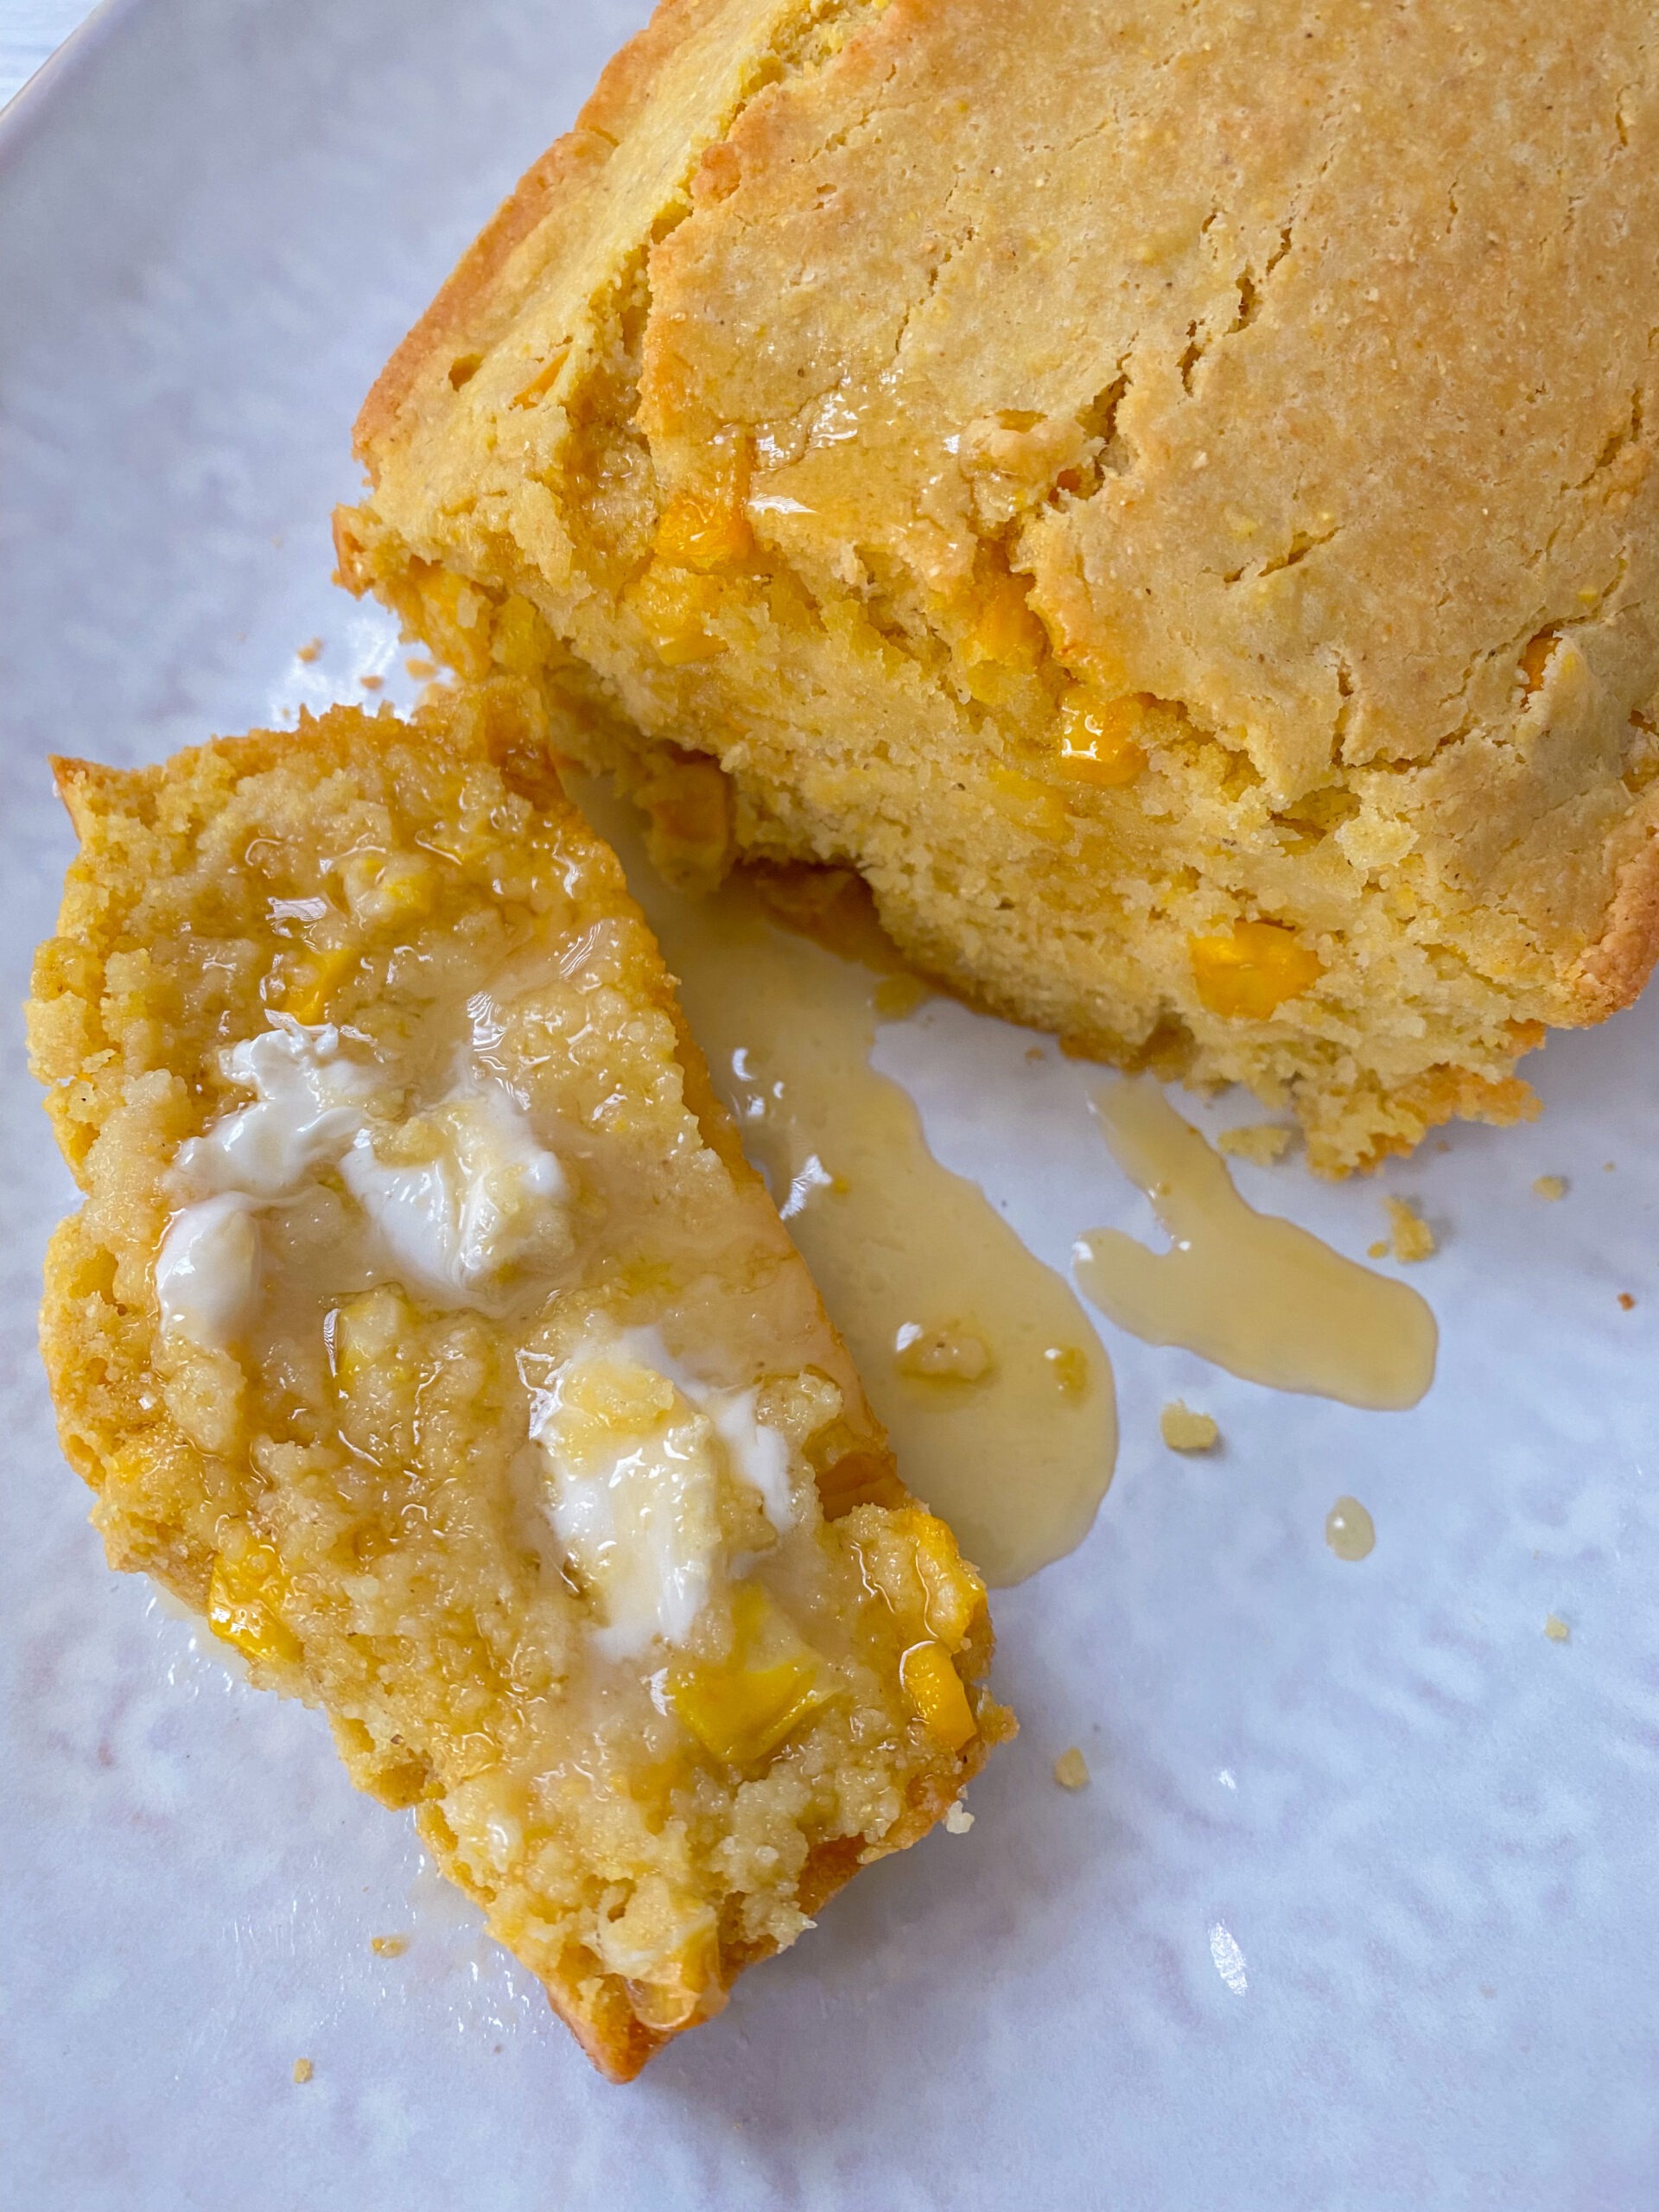 Vegan cornbread served with butter and maple syrup.